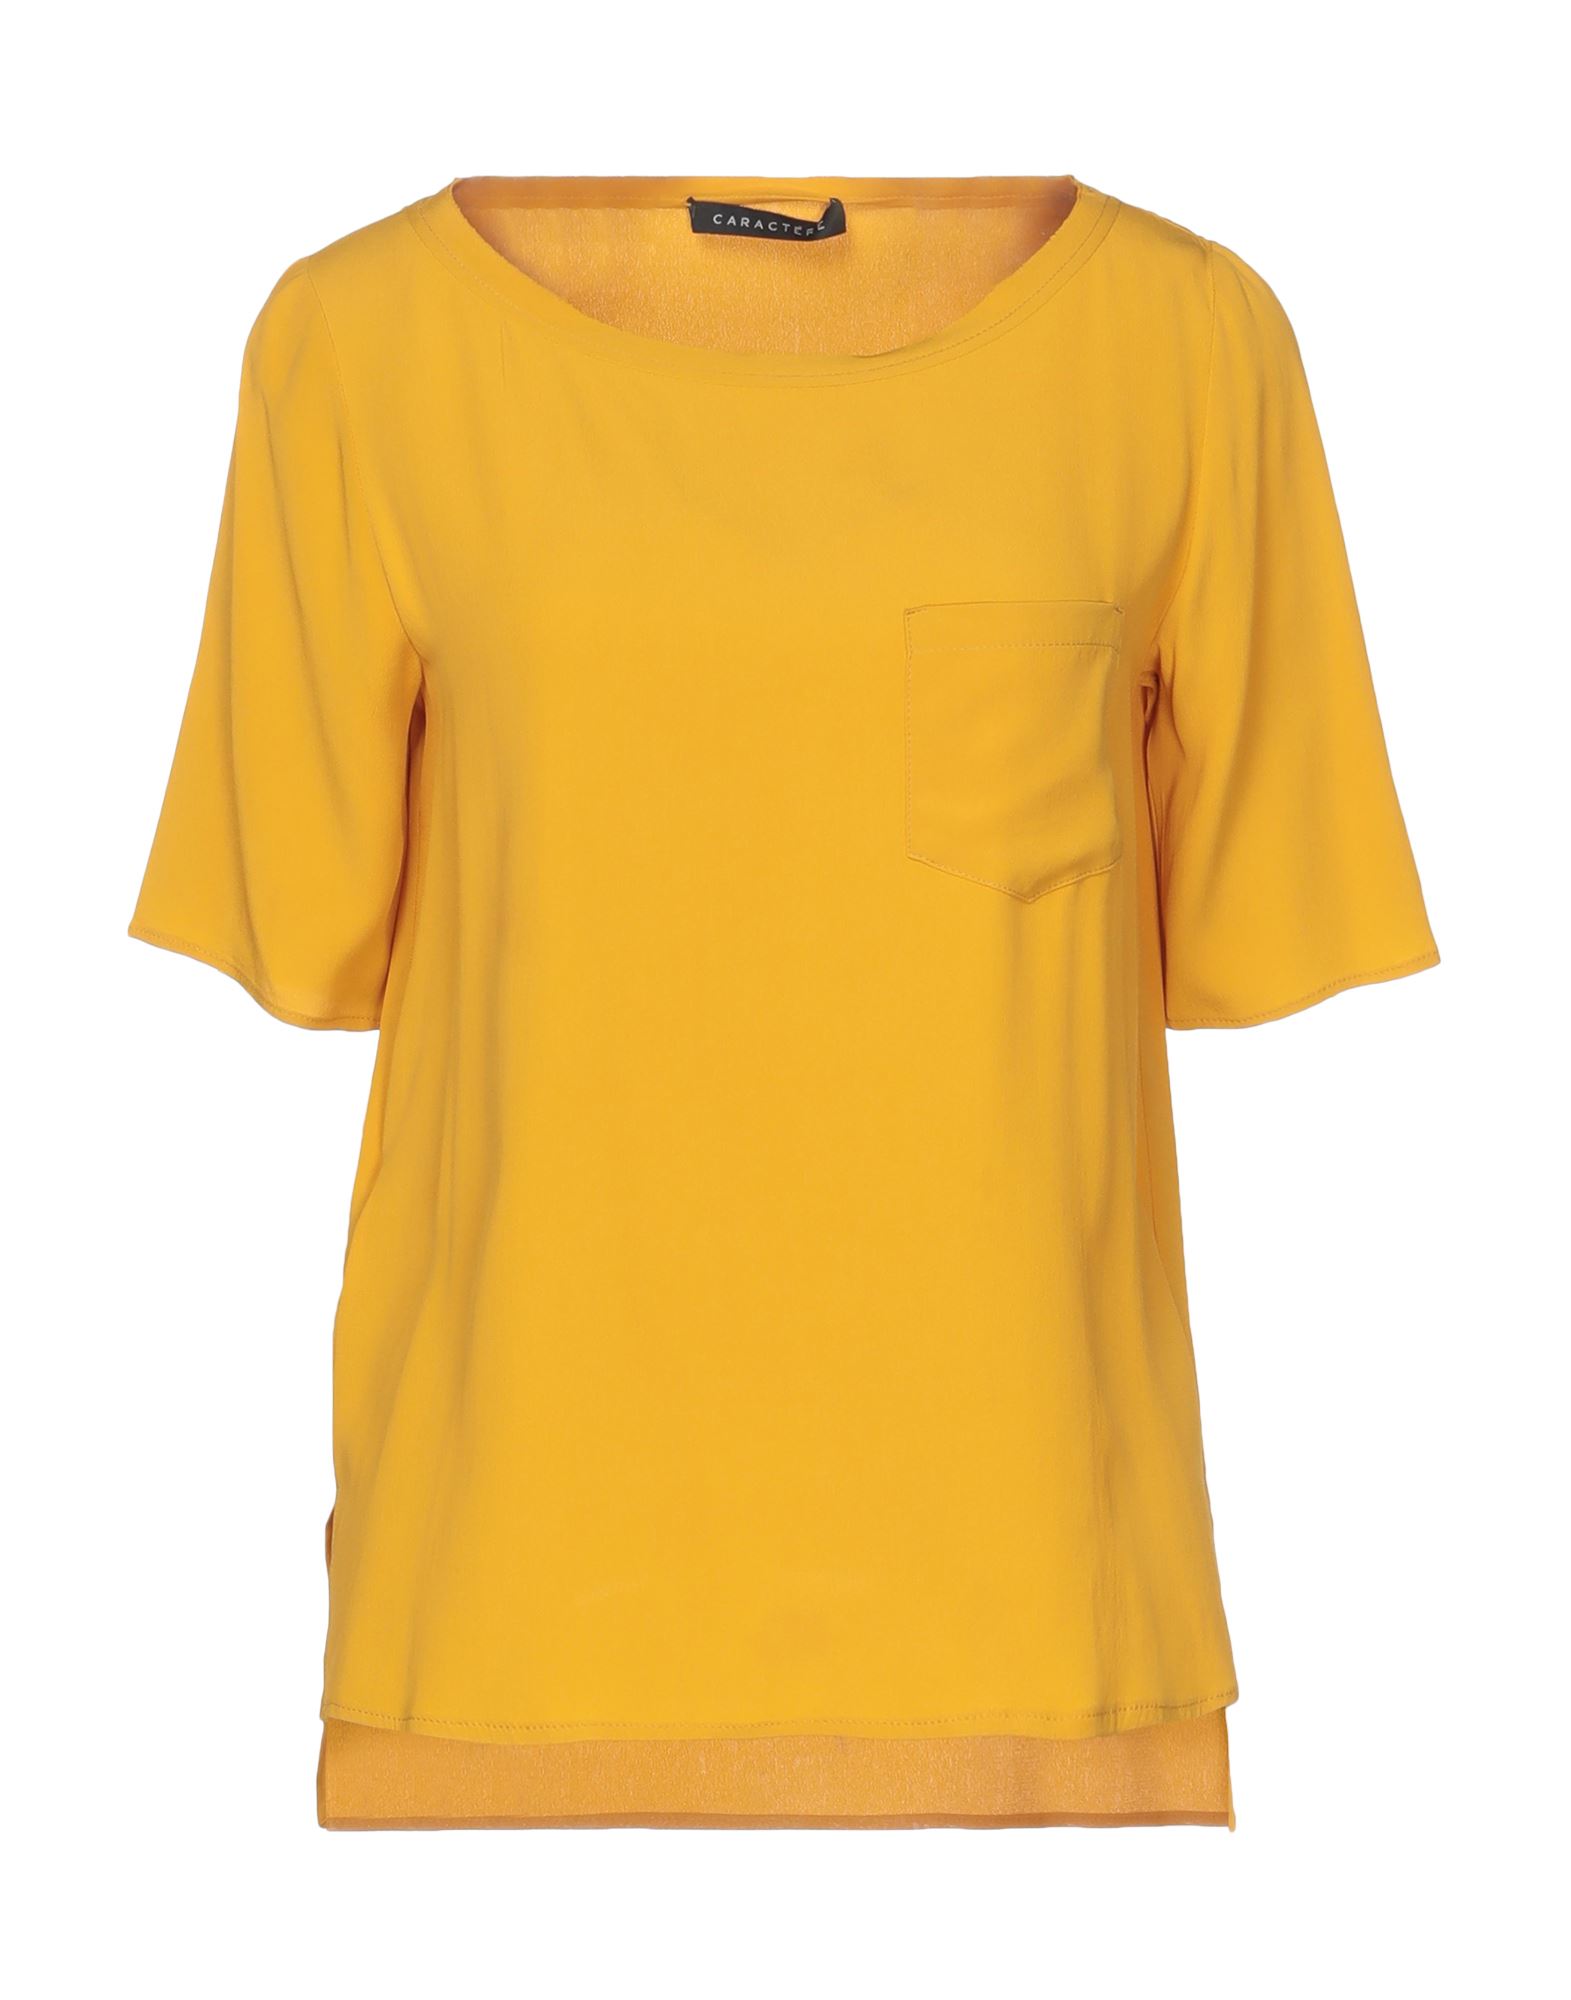 Caractere Caractère Woman Top Ocher Size 4 Acetate, Silk In Yellow